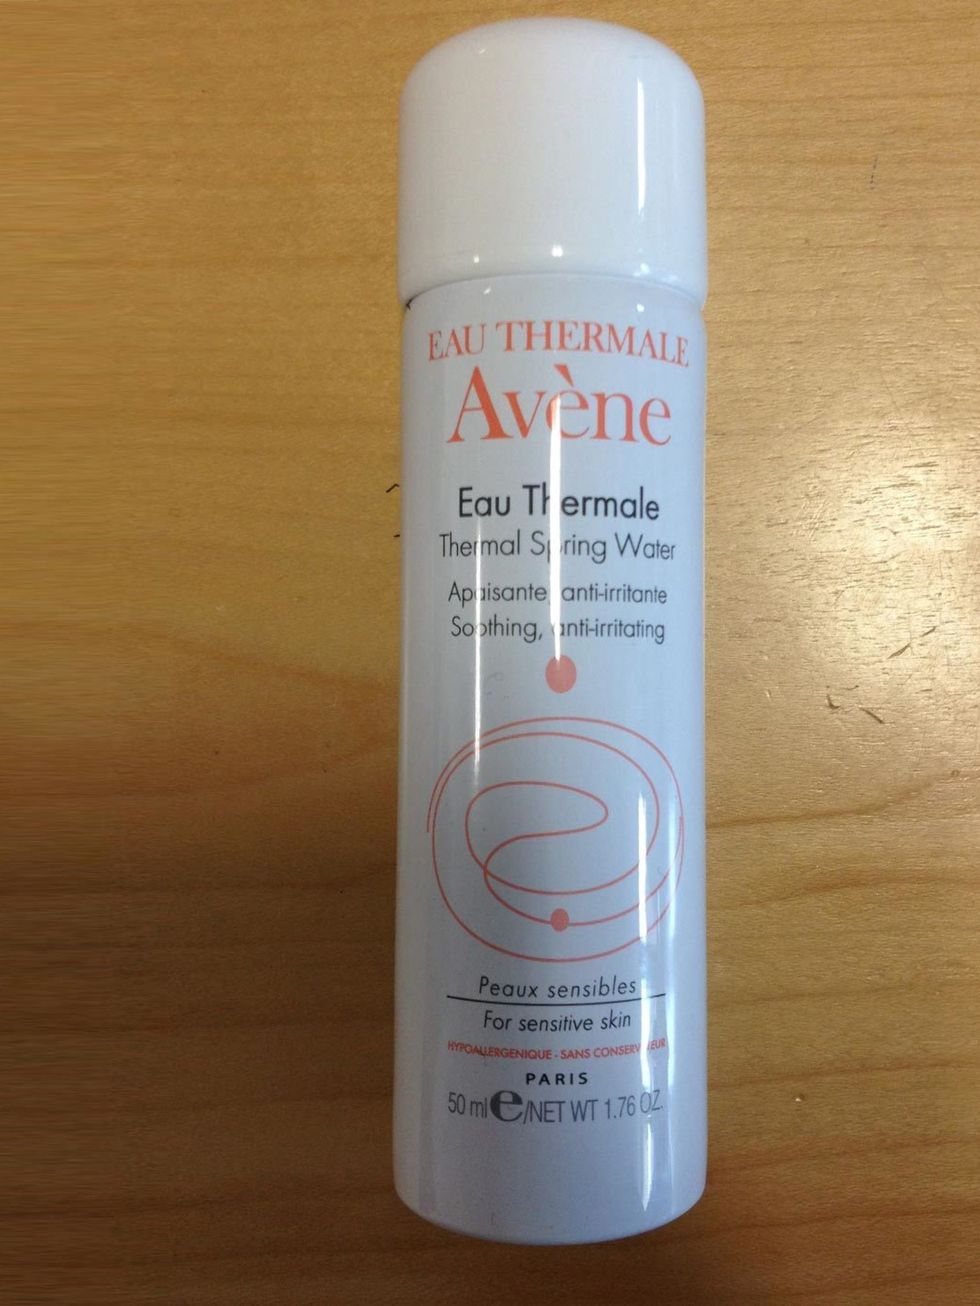 <p><strong>Avene Eau Thermale spray, £3.15, at <a href="http://www.boots.com/en/Avene-Eau-Thermale-Thermal-Water-Spray-50ml_868694/">Boots</a></strong>Keep your thirsty skin hydrated with frequent spritzing. This is particularly brilliant because it's the